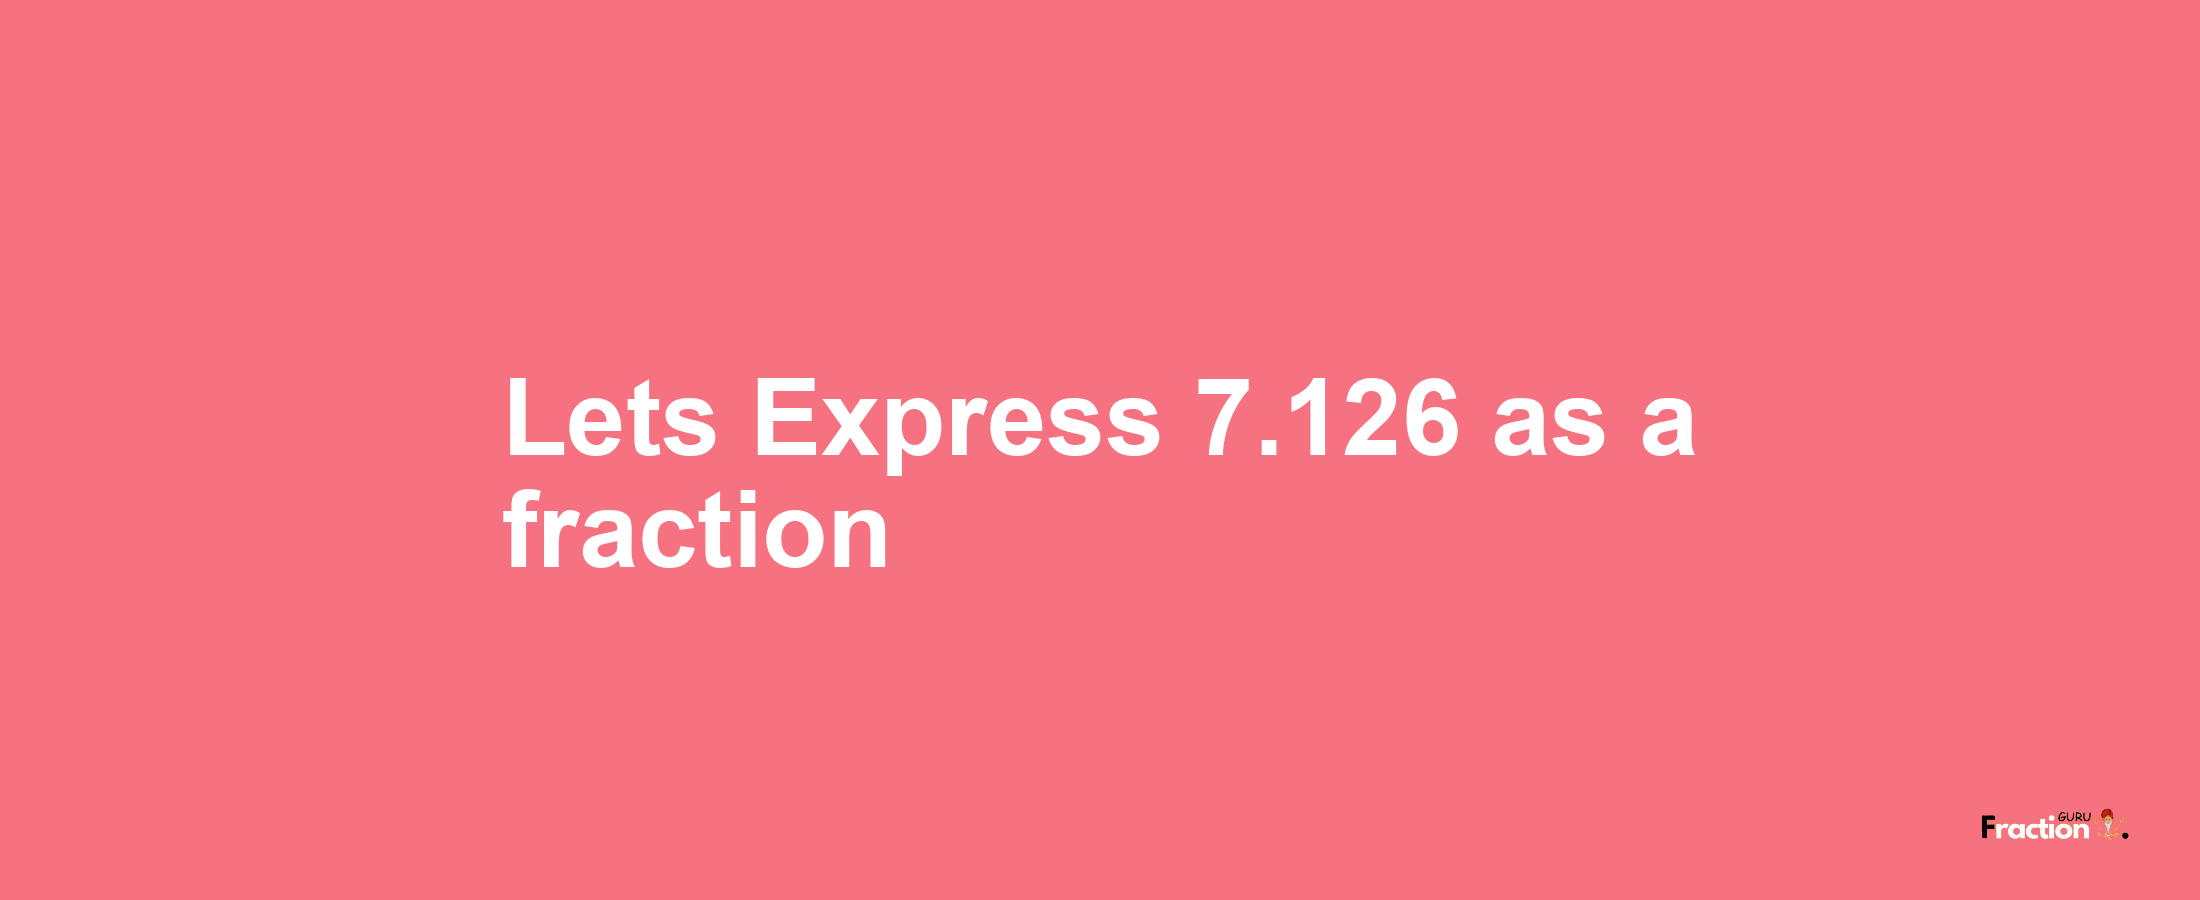 Lets Express 7.126 as afraction